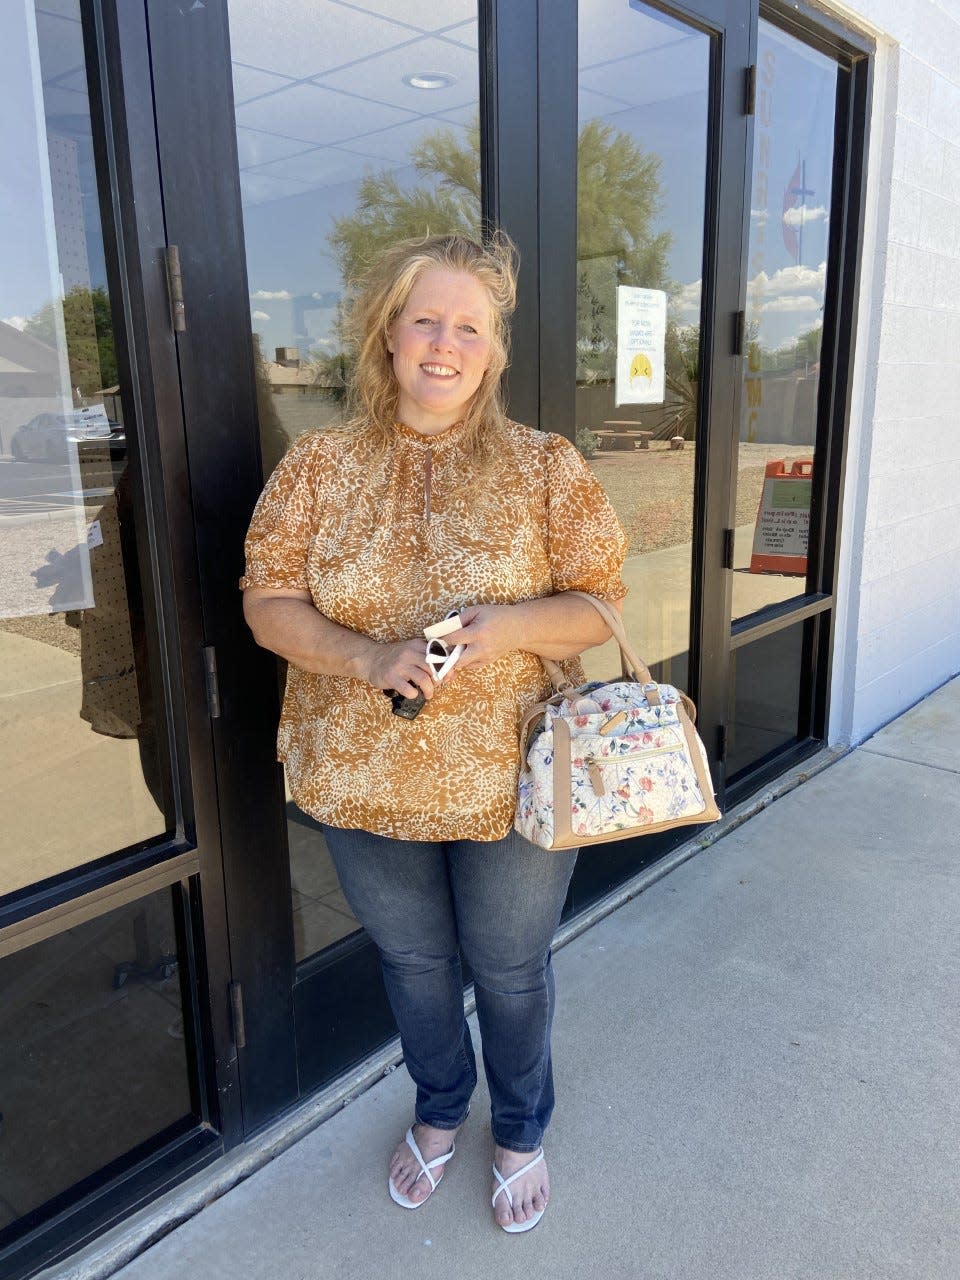 Olivia Noguera, 47, a registered Independent, chose a Democratic ballot for the August 2022 primary election in Legislative District 2 in Phoenix.